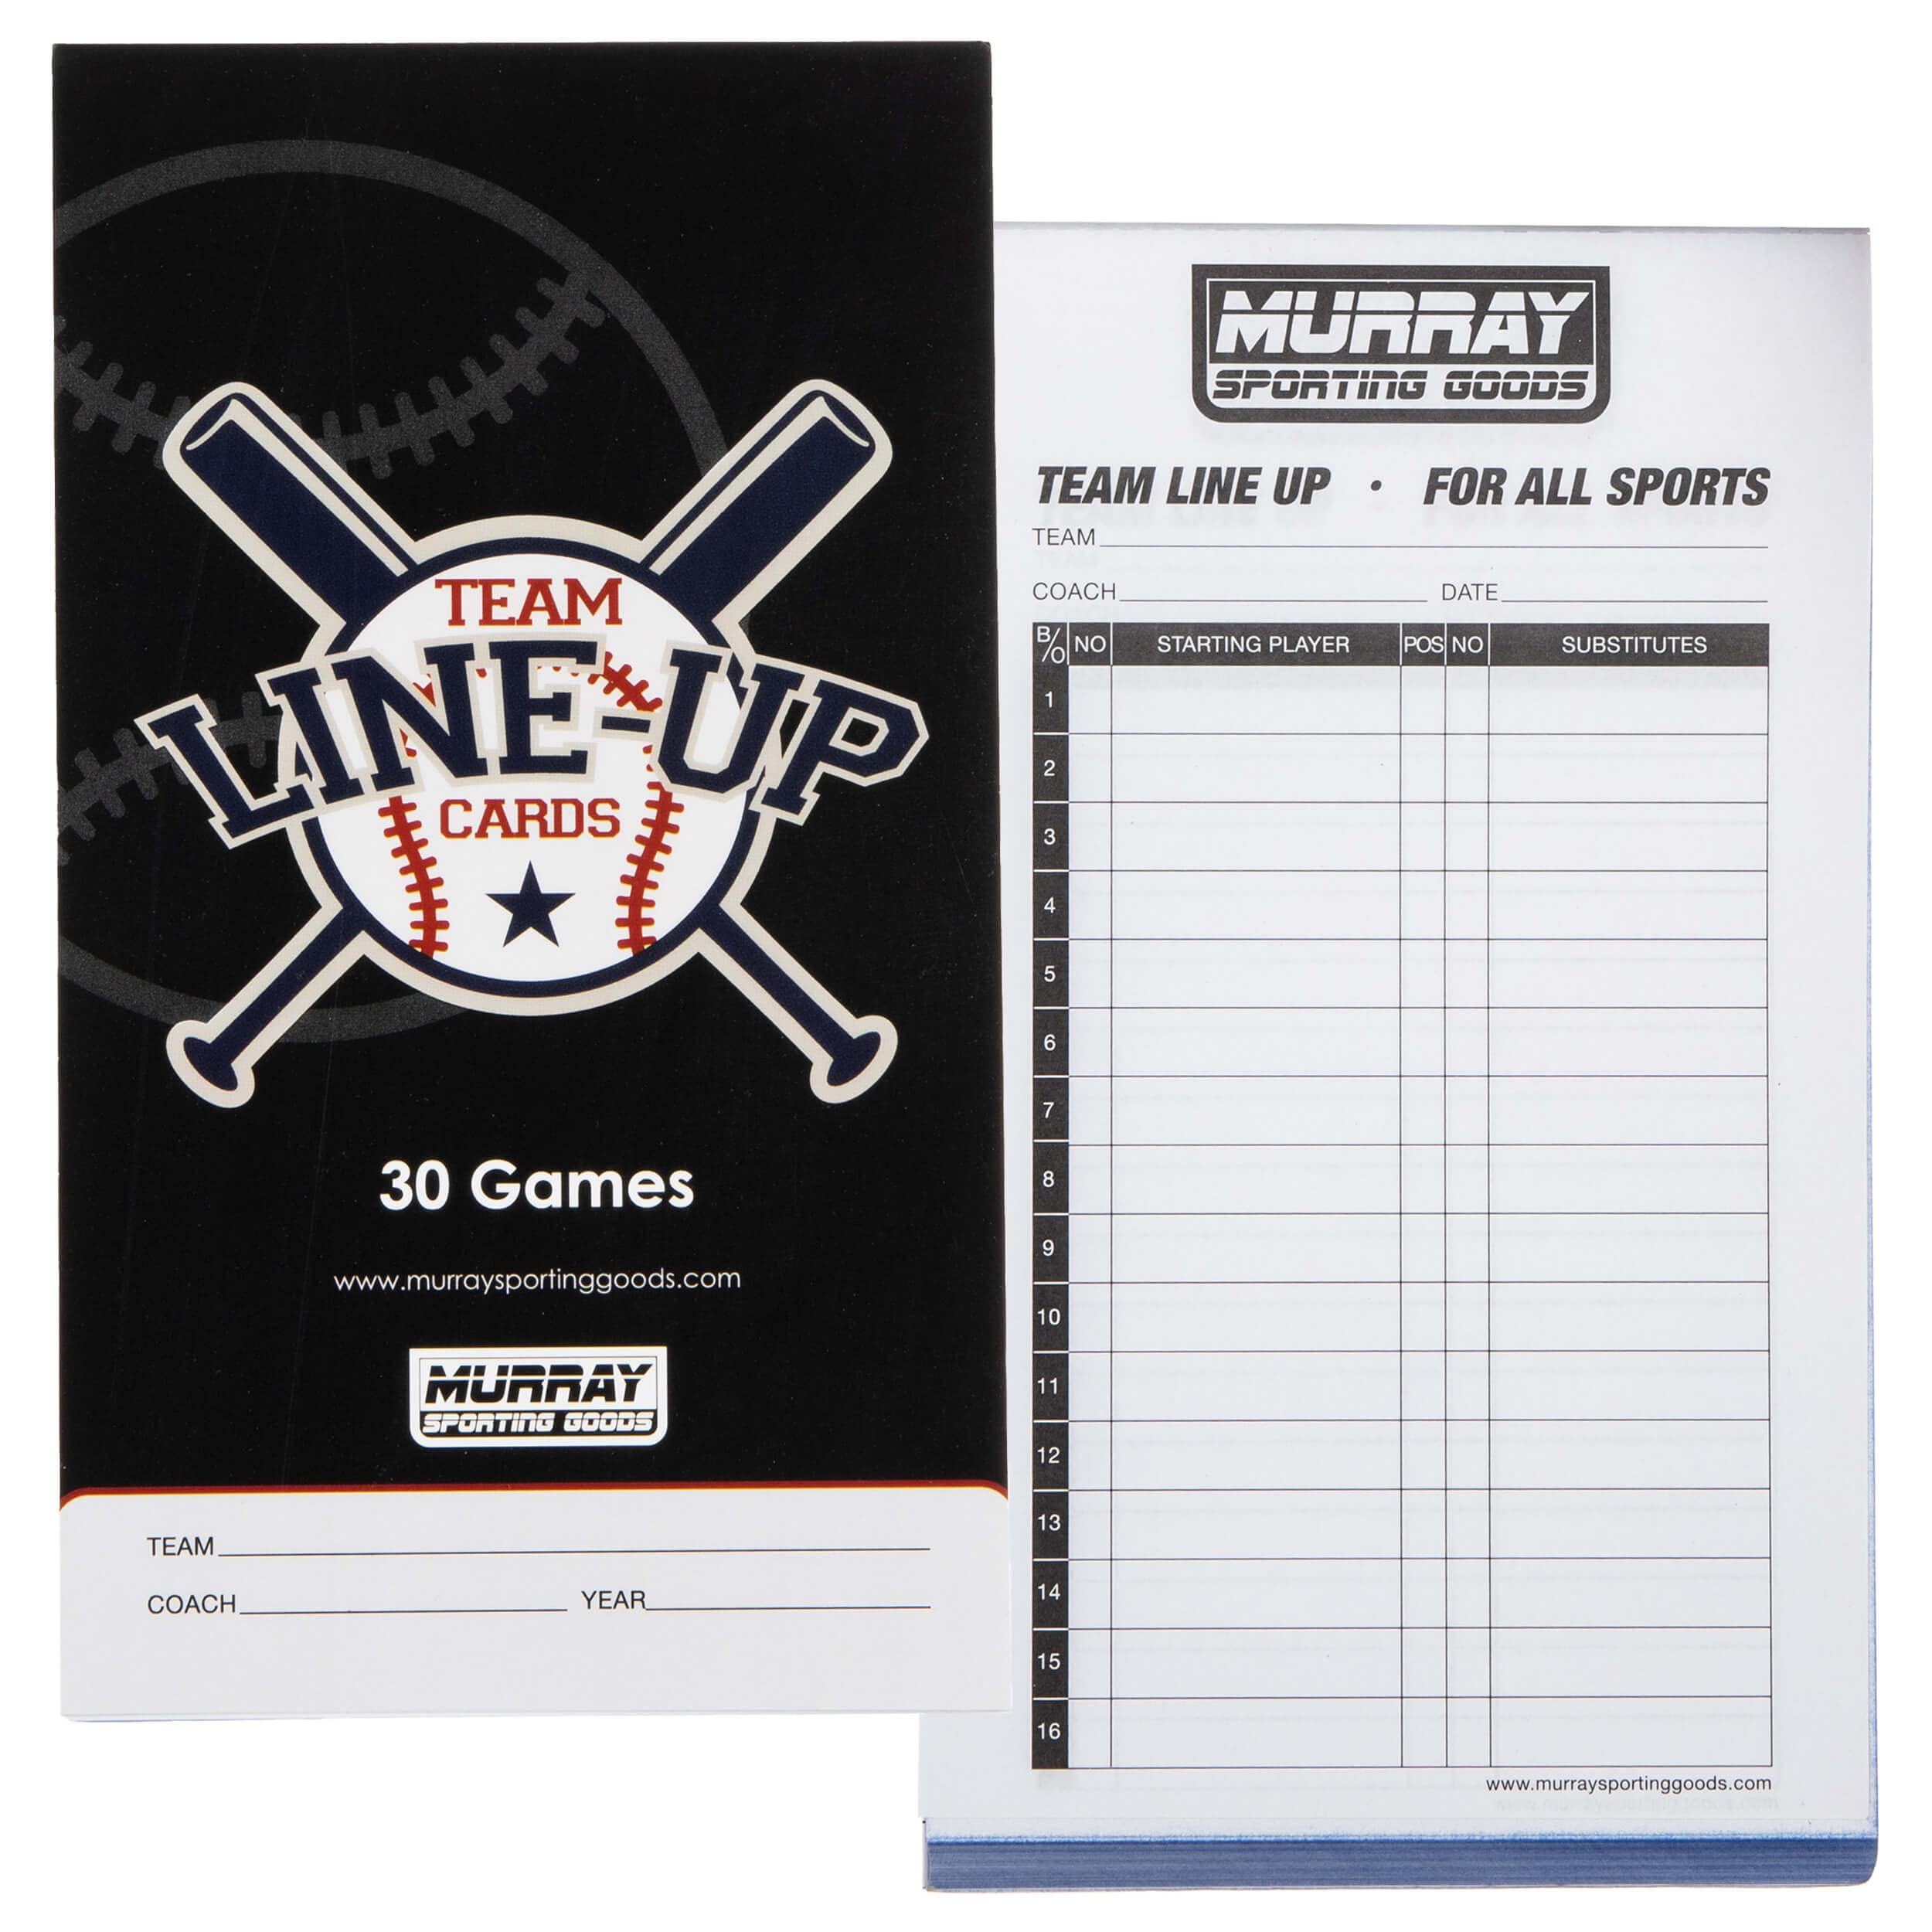 Murray Sporting Goods Baseball/Softball Lineup Cards - 30 Games with 16 Player Roster Lineup Sheet (4-Part Carbon copies)